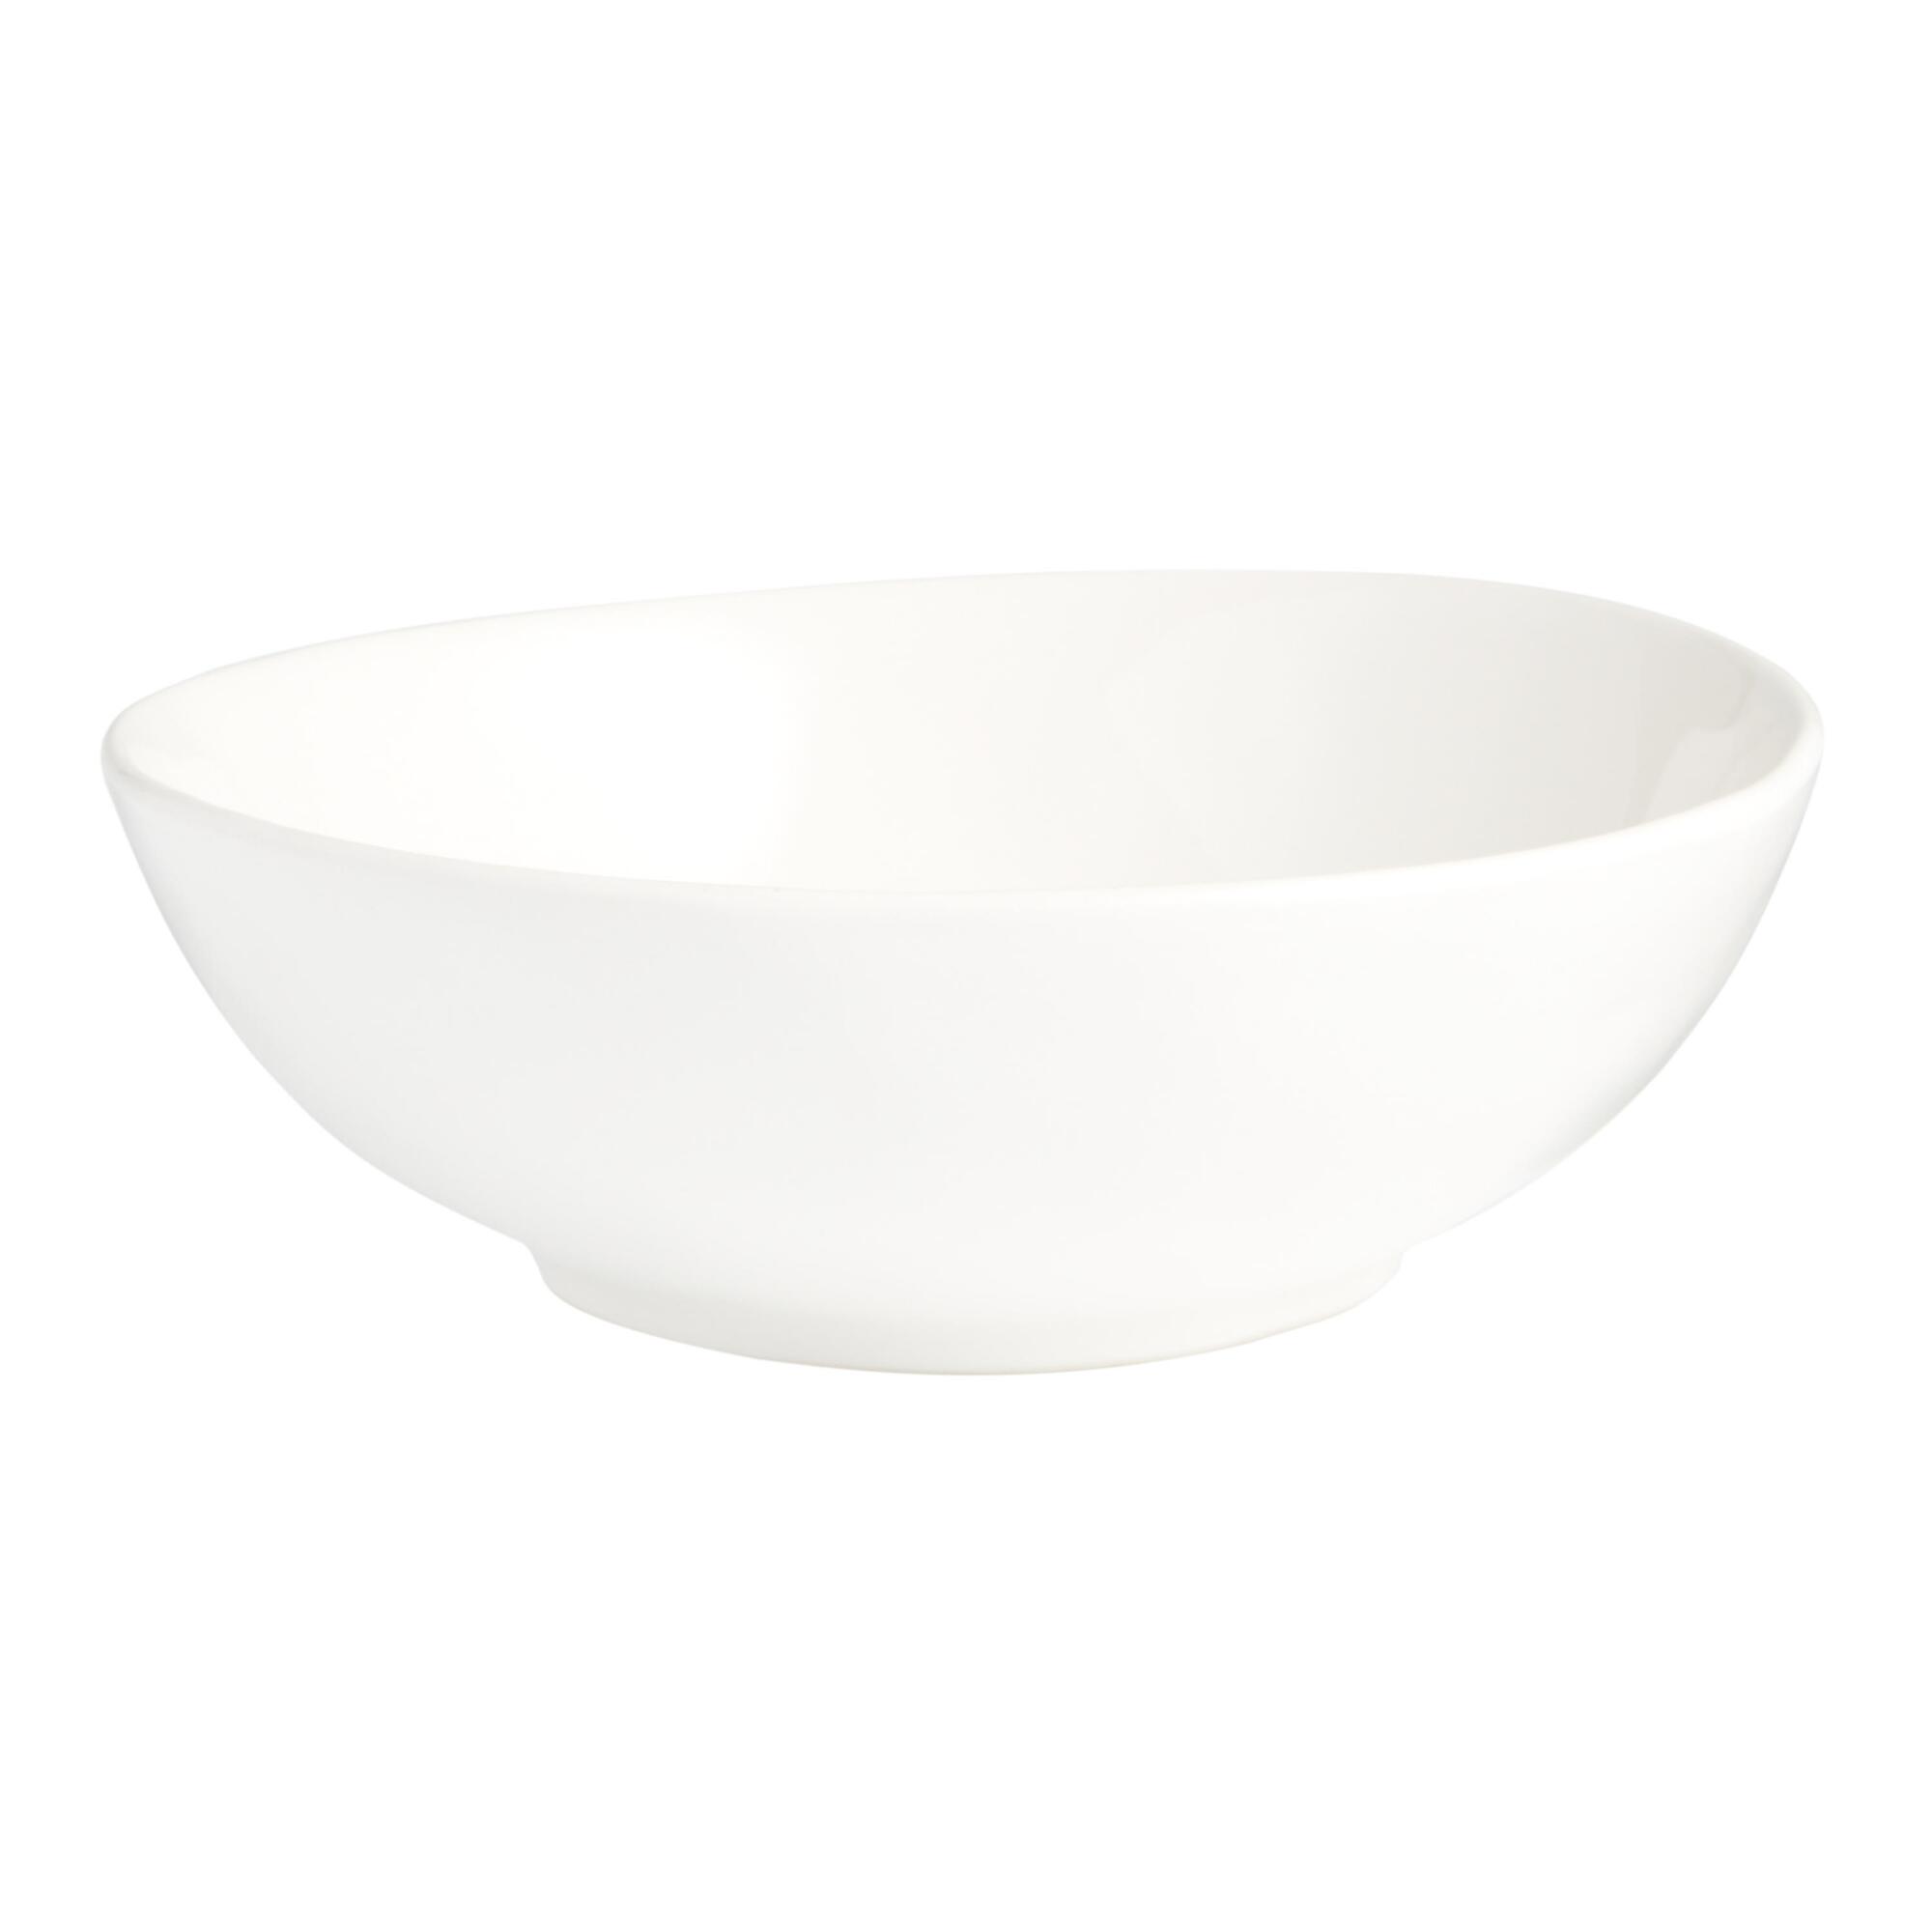 Ivory Element Cereal Bowls Set Of 4: White by World Market